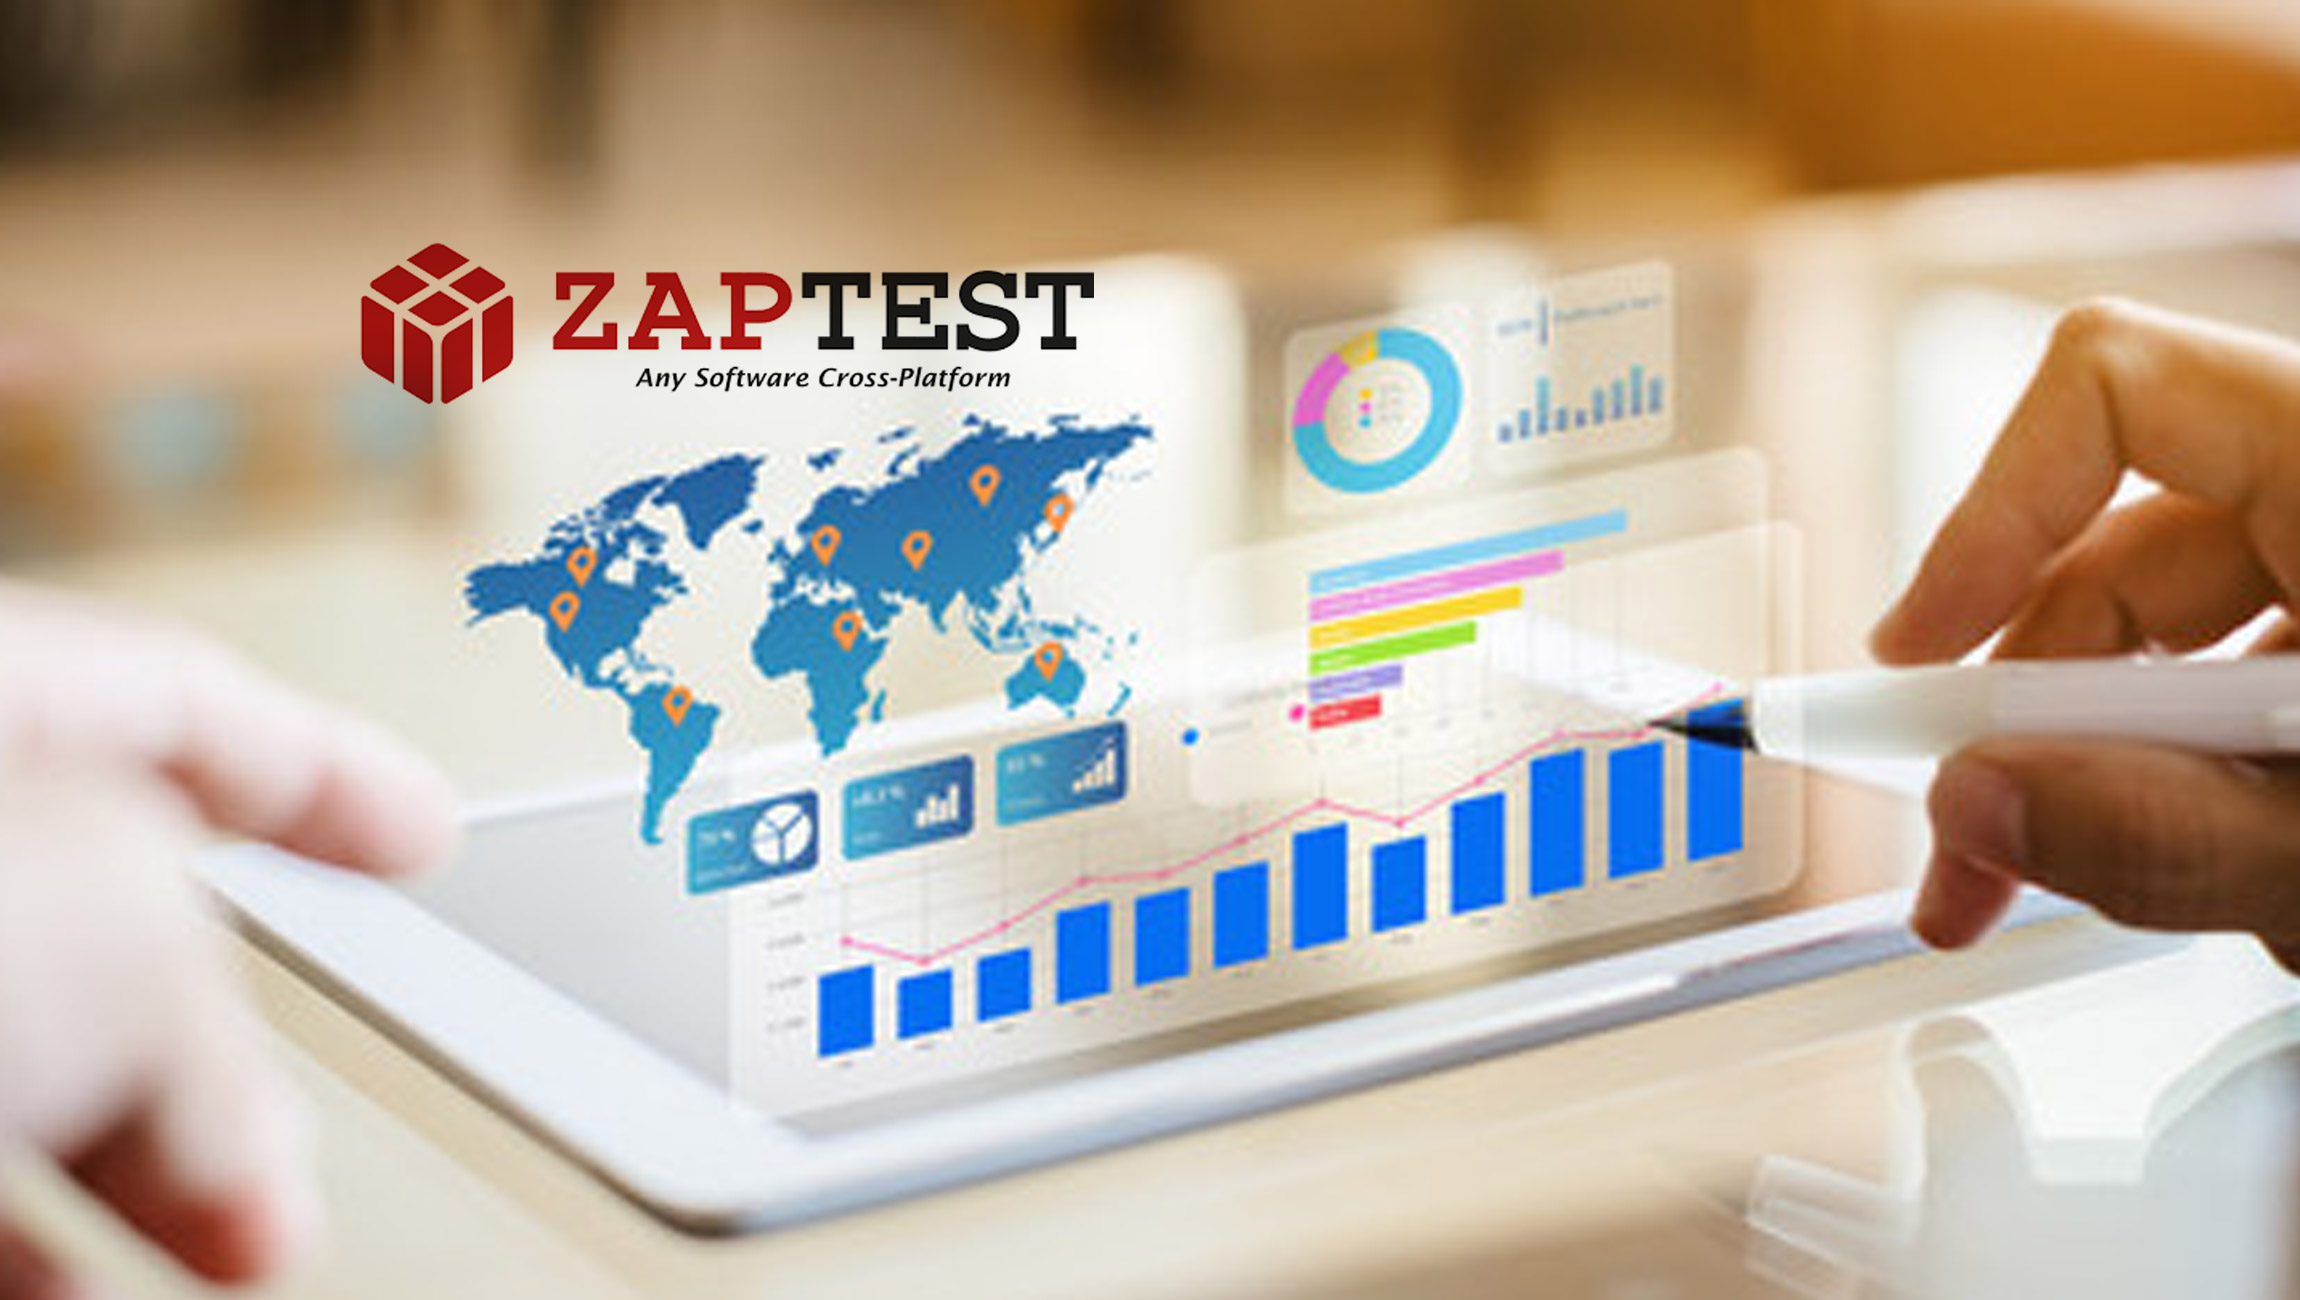 ZAPTEST: 3 Steps to Start Your RPA Journey with the help of this Gartner® report